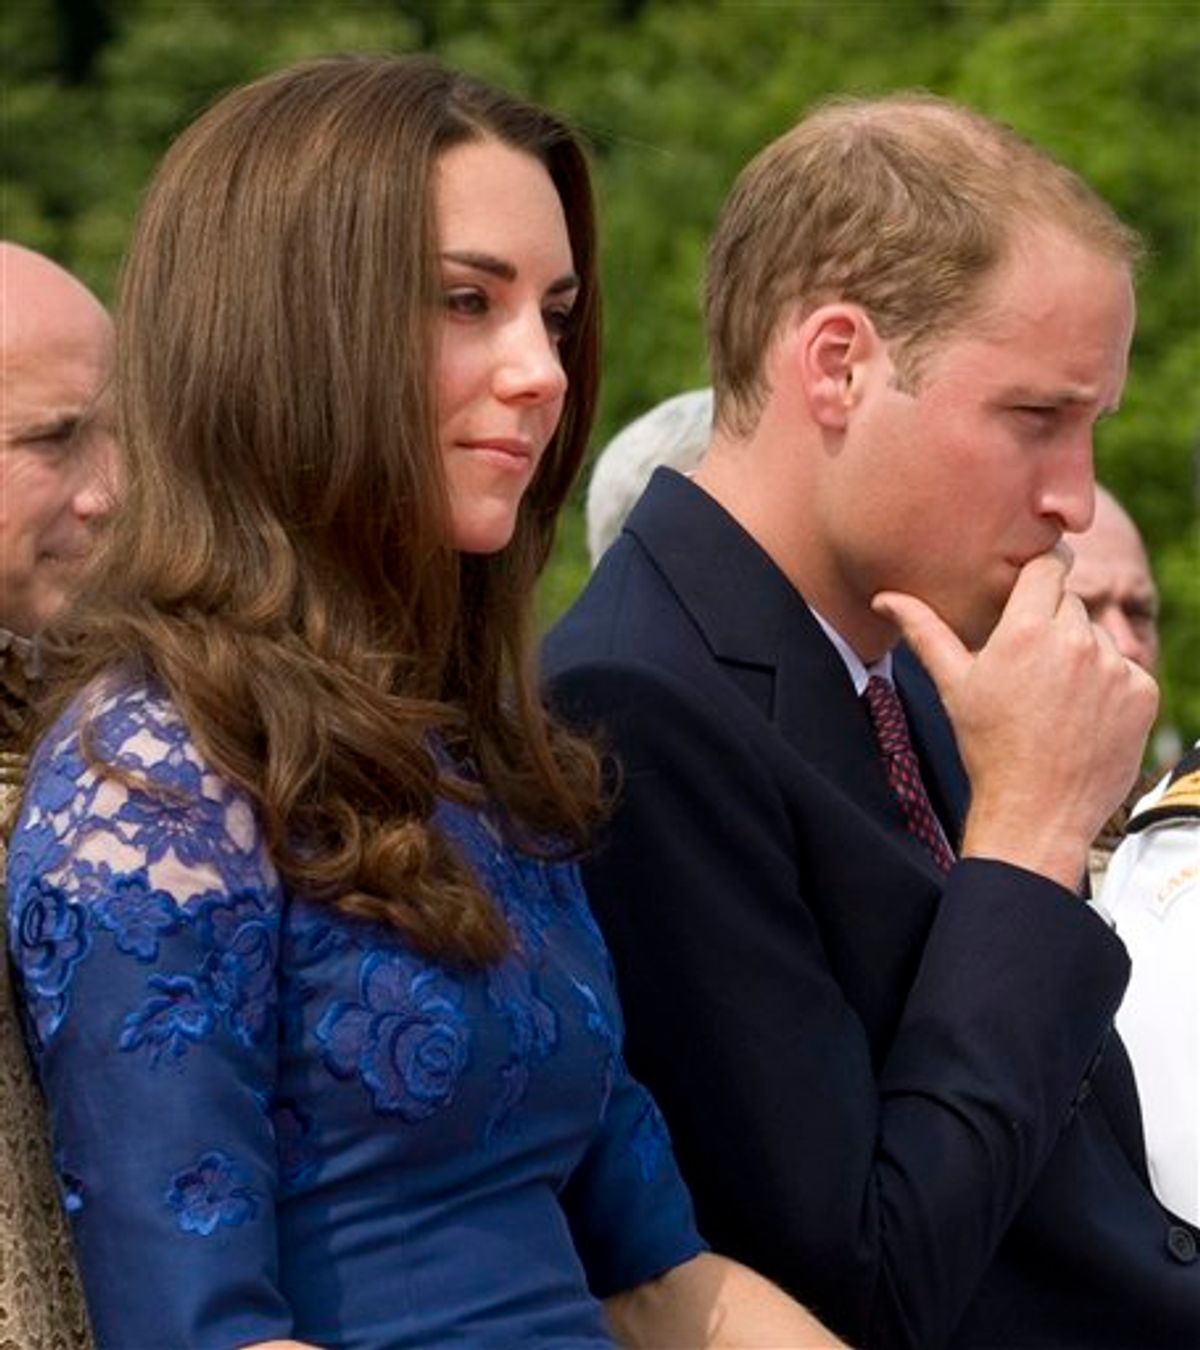 Prince William and Kate, the Duke and Duchess of Cambridge, take part in a religious ceremony on HMCS Montreal in Quebec City , Sunday July 3, 2011. (AP Photo/The Canadian Press, Adrian Wyld) (AP)